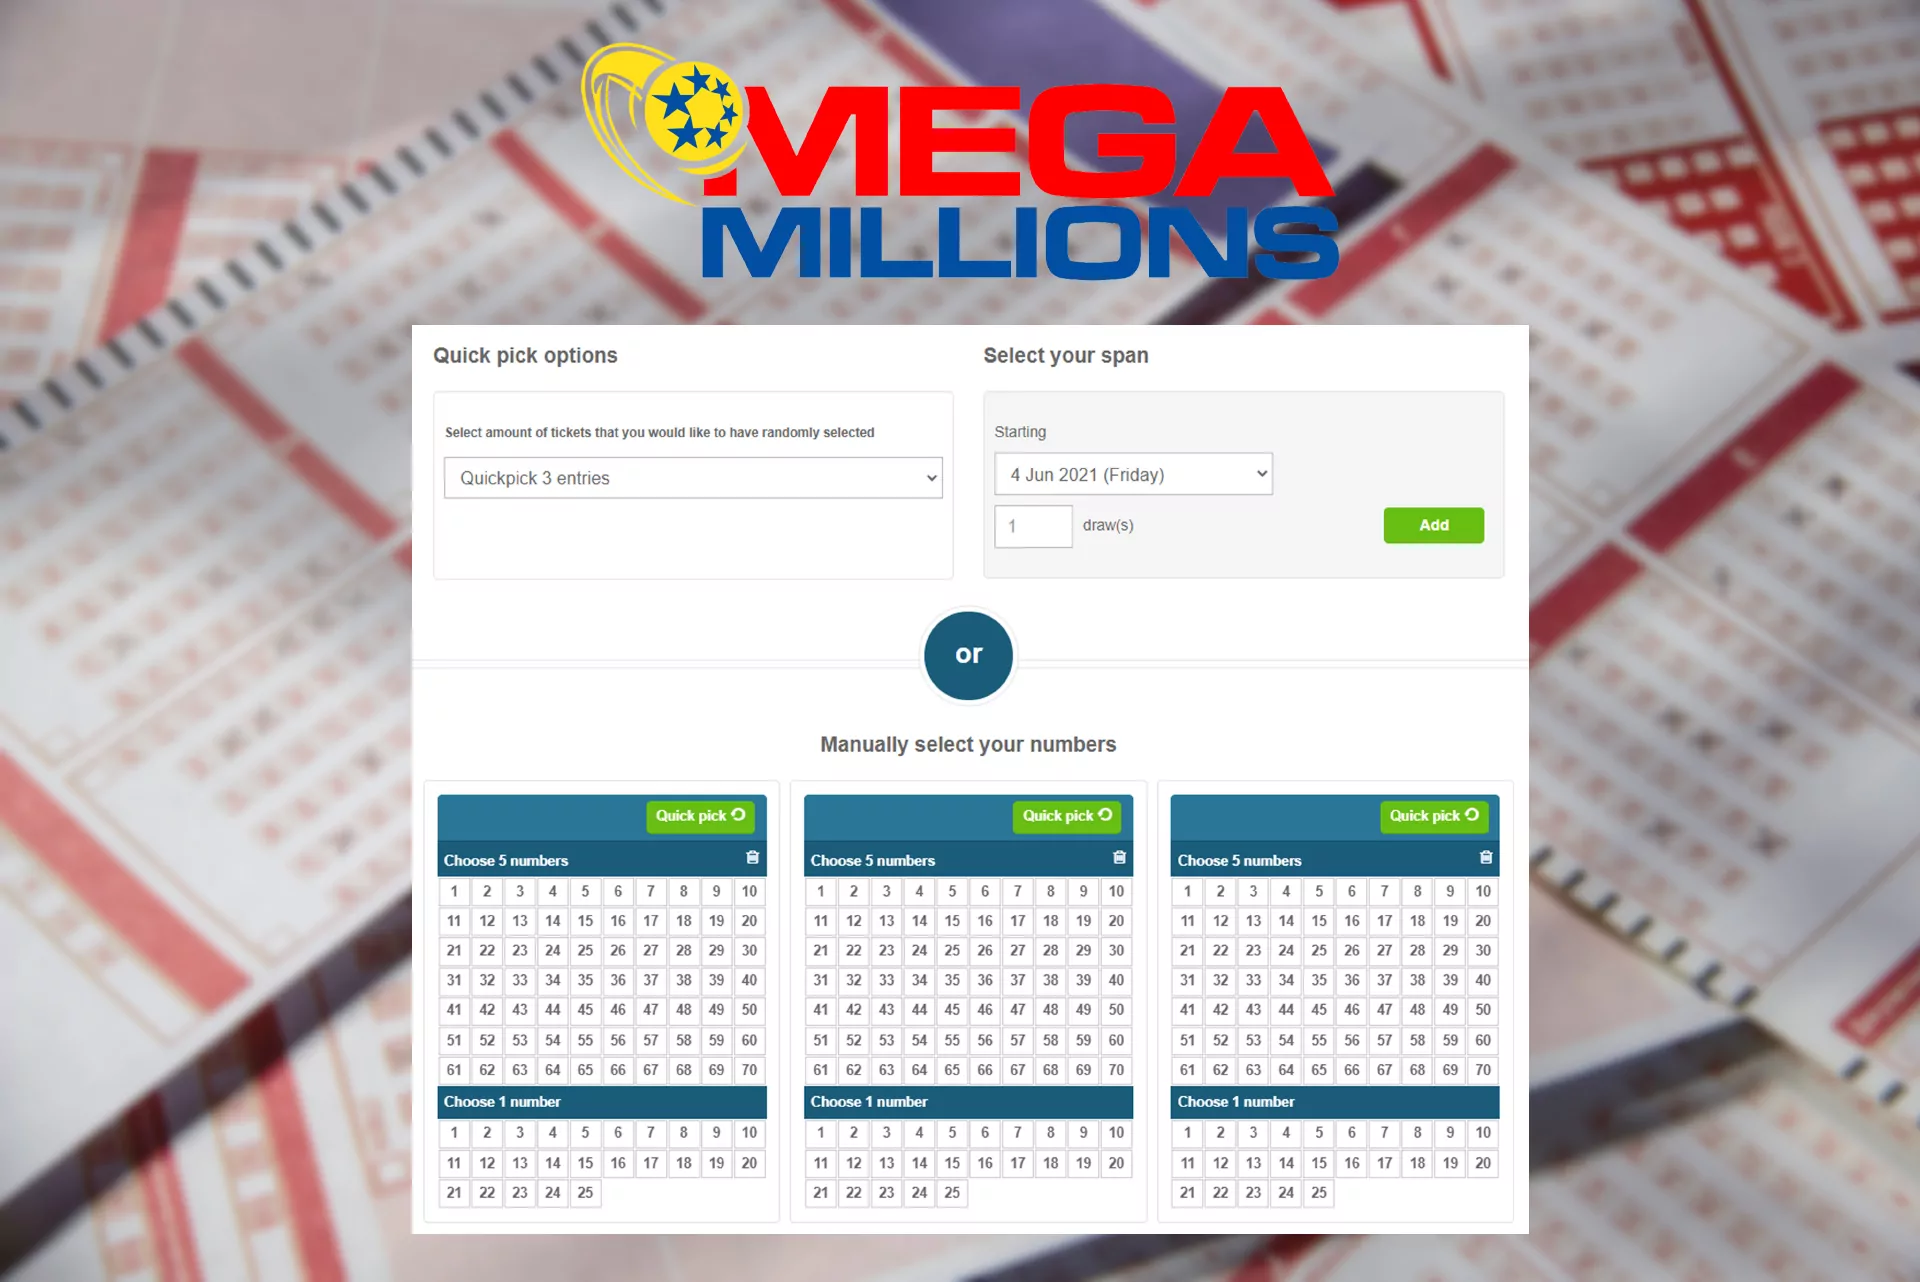 In the Mega Millions lottery, players have to choose 5 numbers.